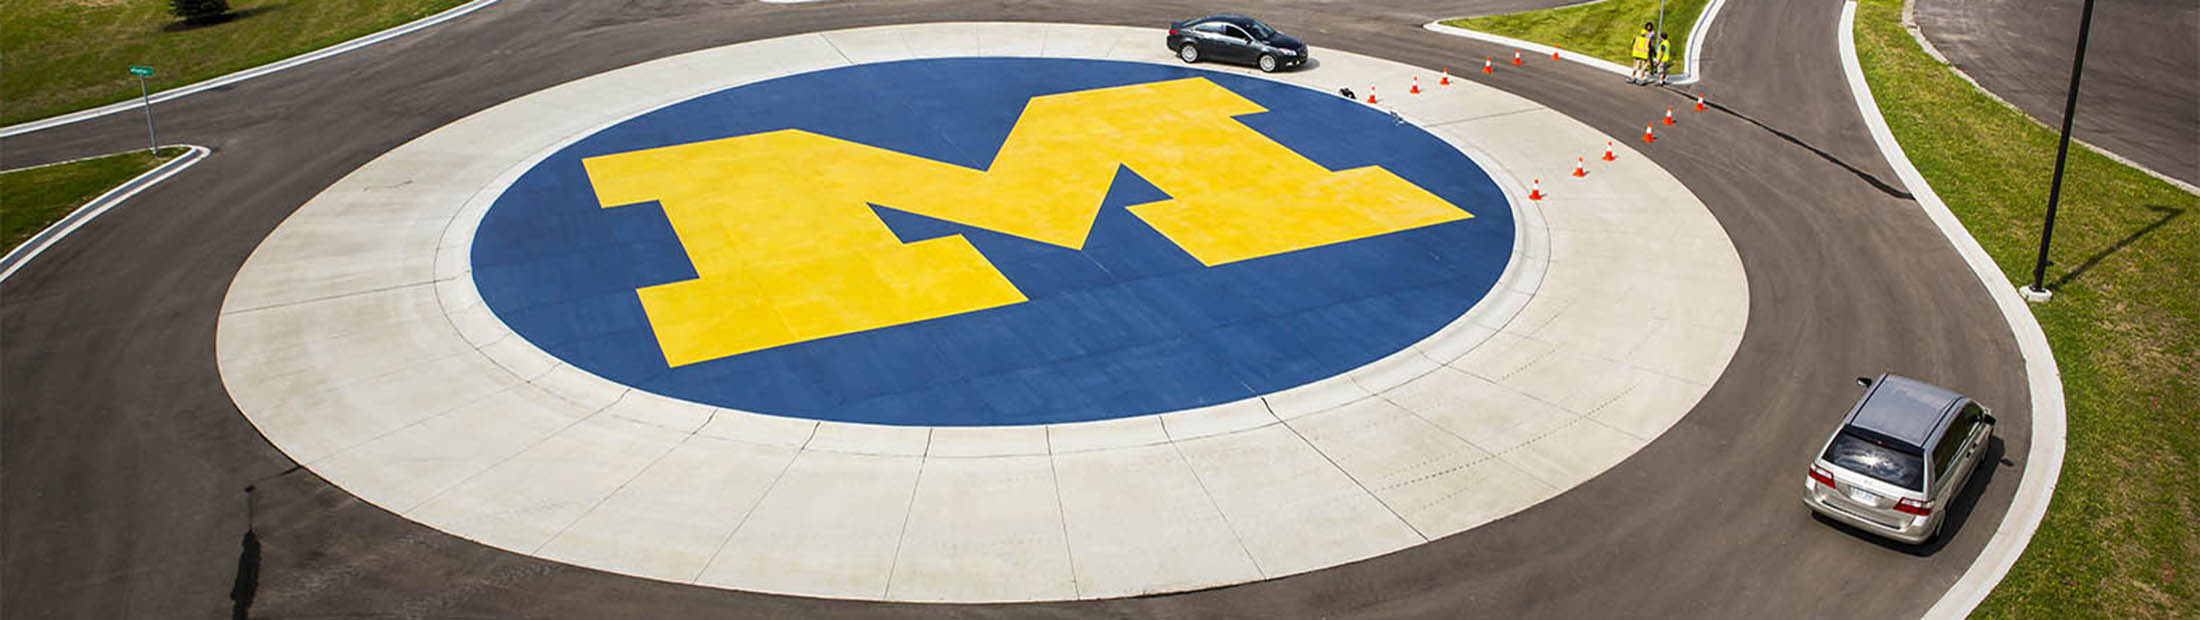 Aerial view of roundabout with Michigan logo in center